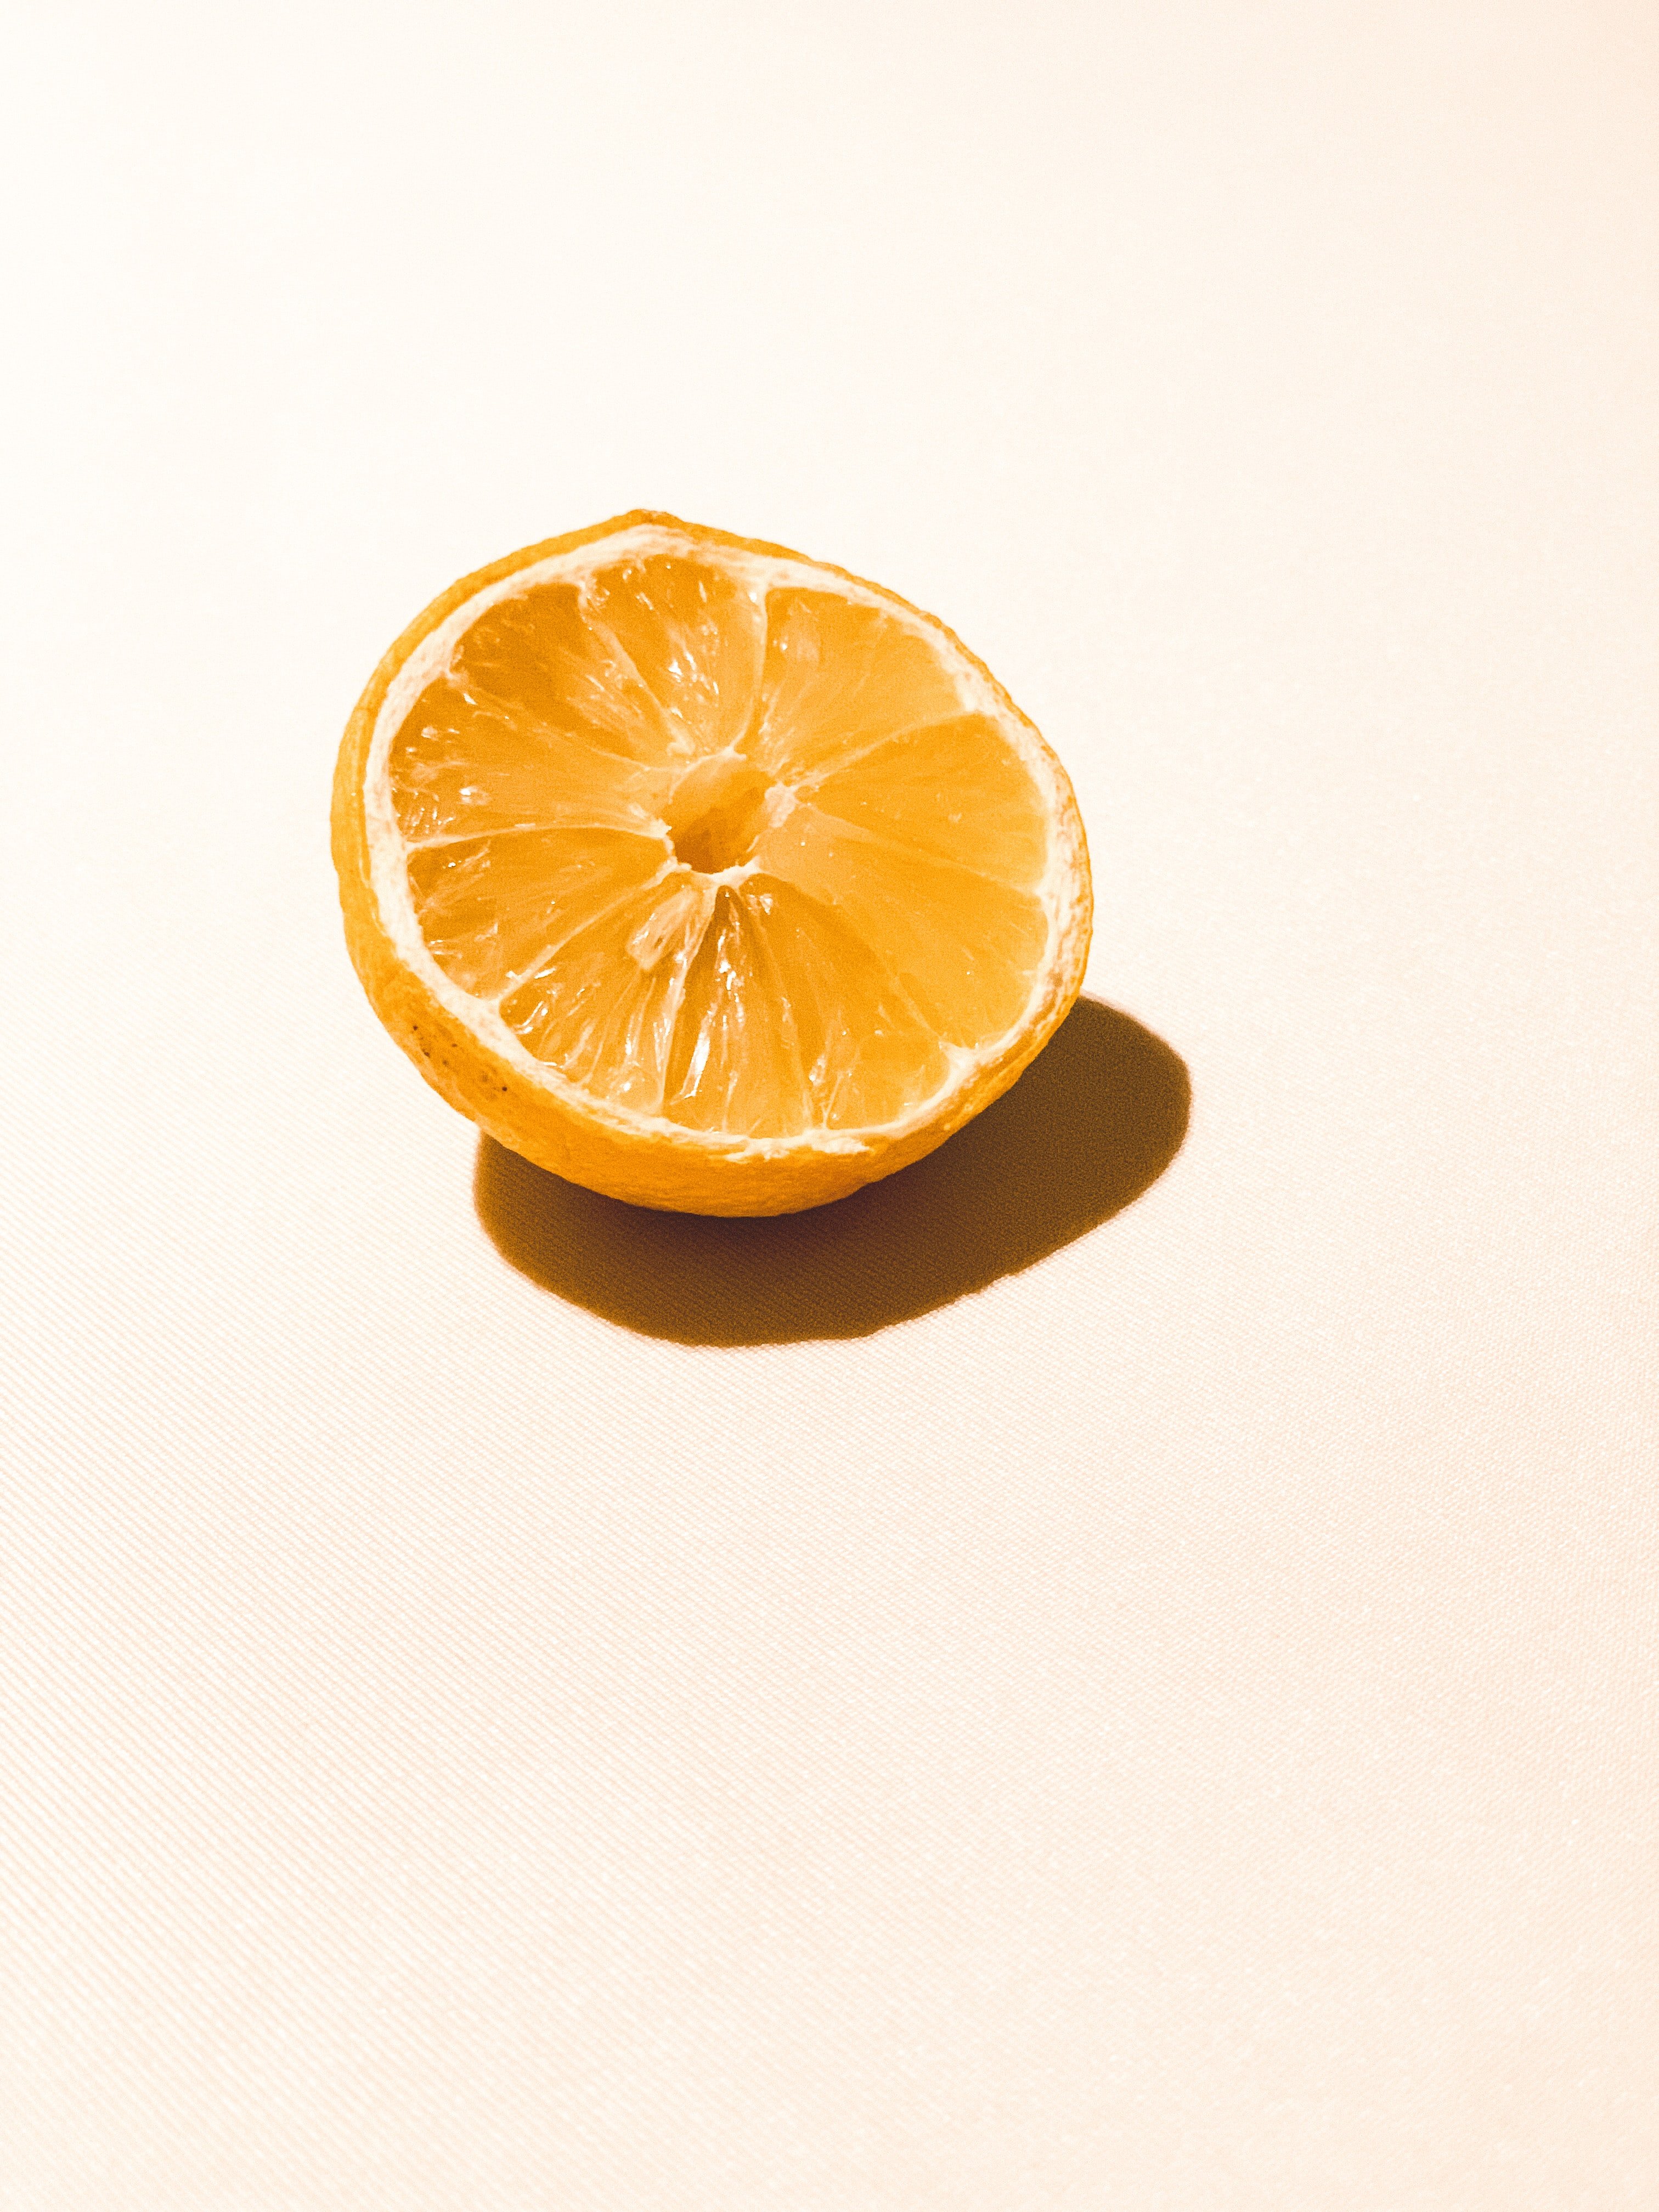 Ask Our Esthetician: All You Need to Know About Vitamin C